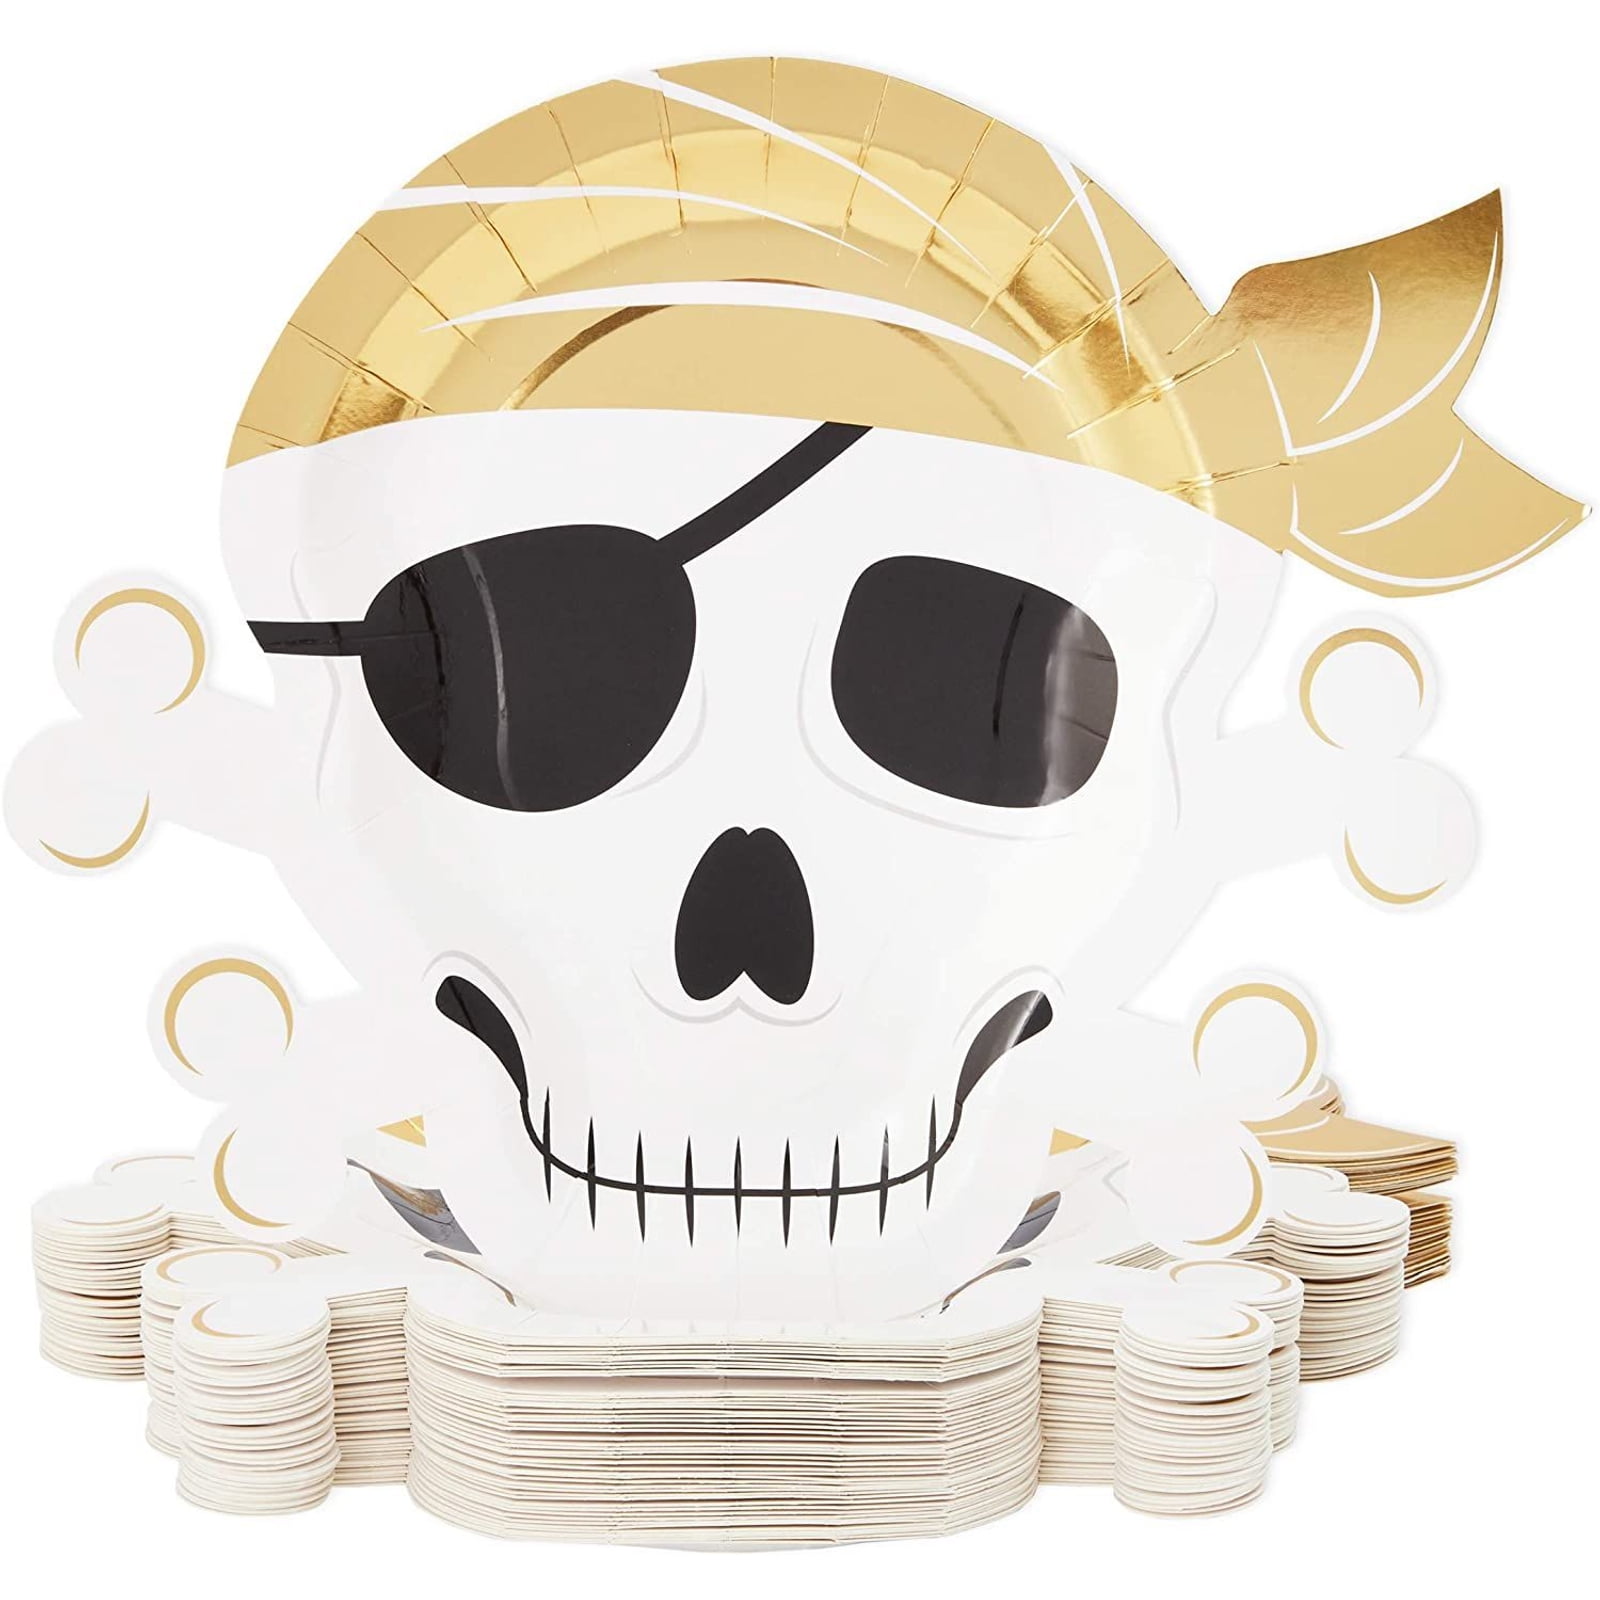 PIRATE PARTY HONEYCOMB CENTERPIECE Parrot Table Decoration Pirates Decor New I 